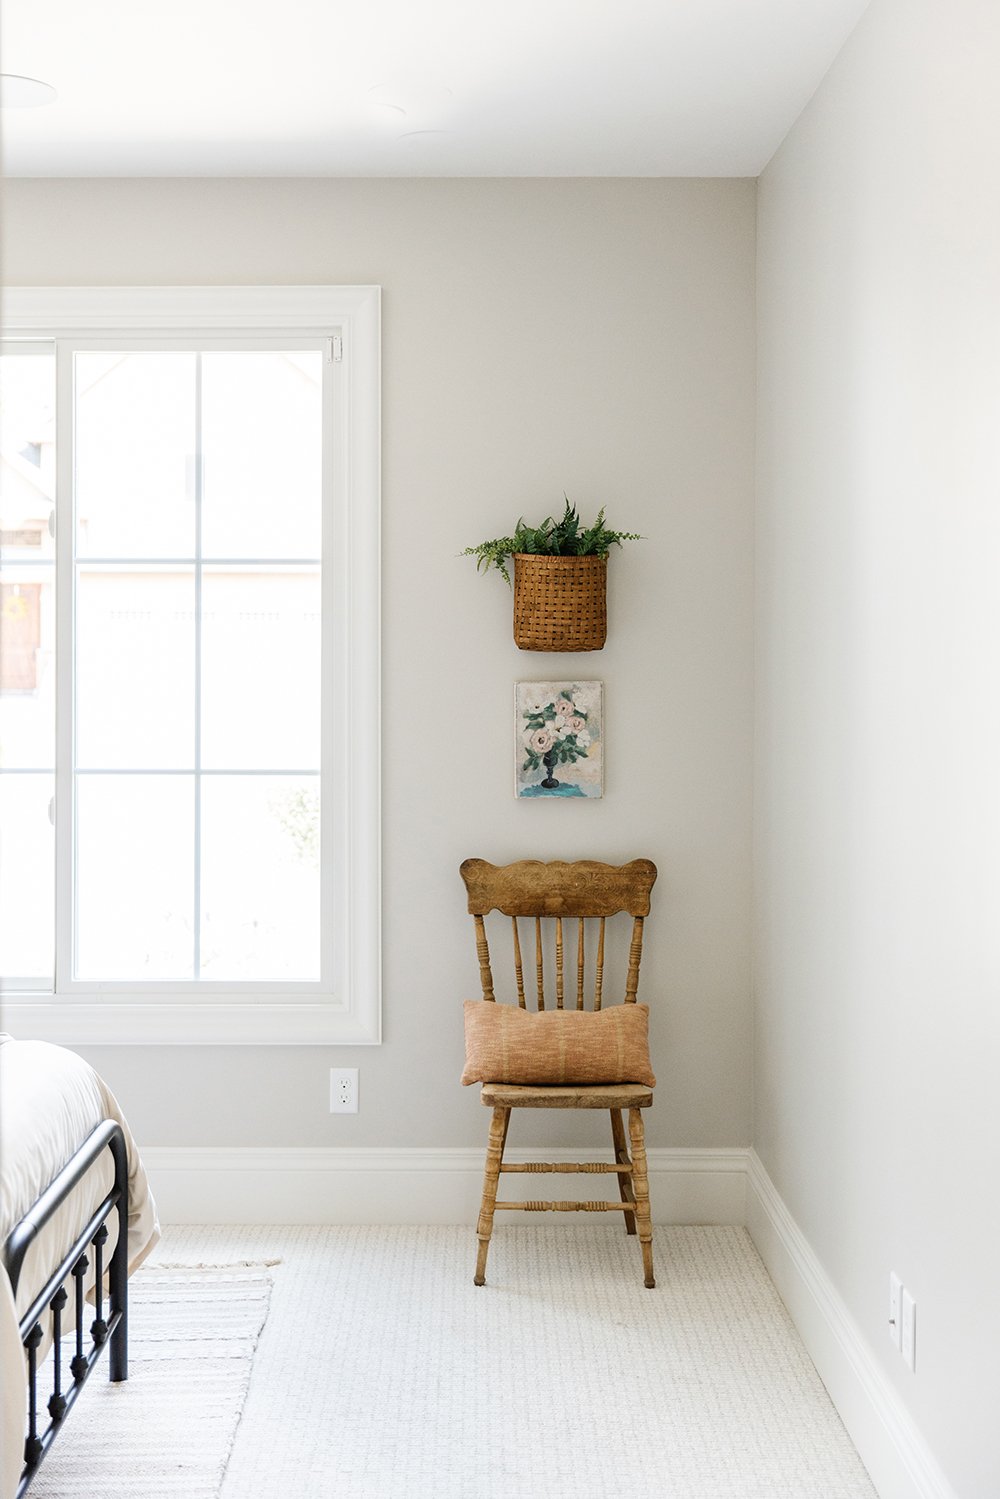  Using an antique chair as a statement piece, Liz Powell uses that as a starting point for other decoration colors and styles. The basket and floral print pair well with the chair and the wall colors. Antique chair woven basket #neutralpaint #antique